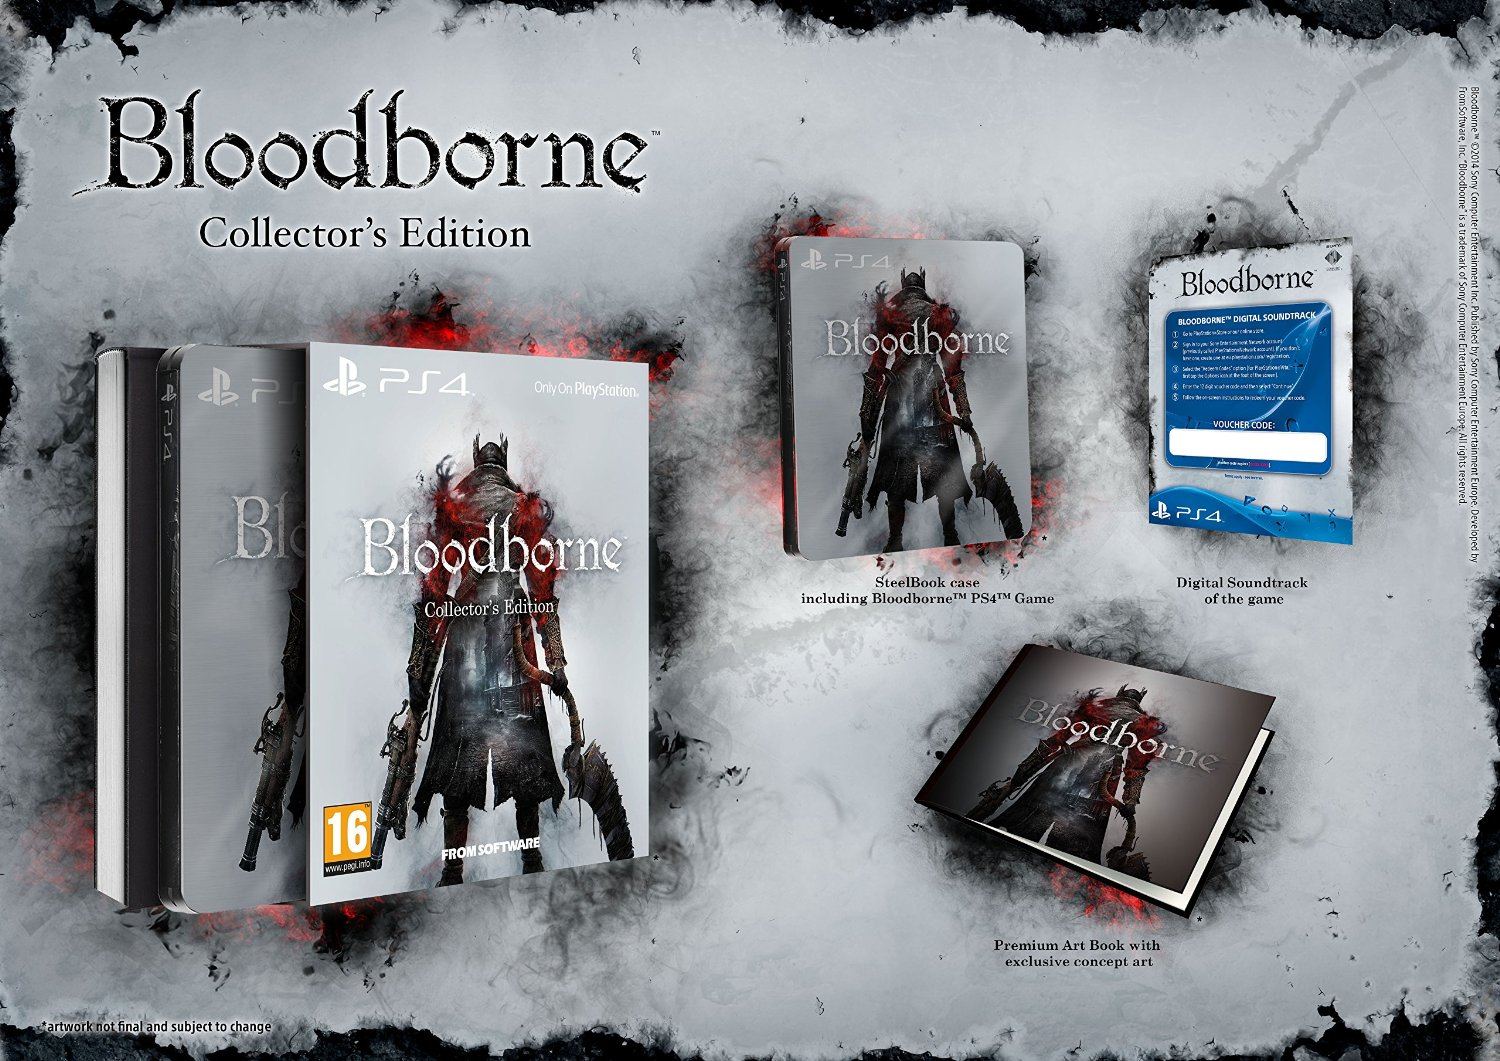 Bloodborne (Collector's Edition) for PlayStation 4